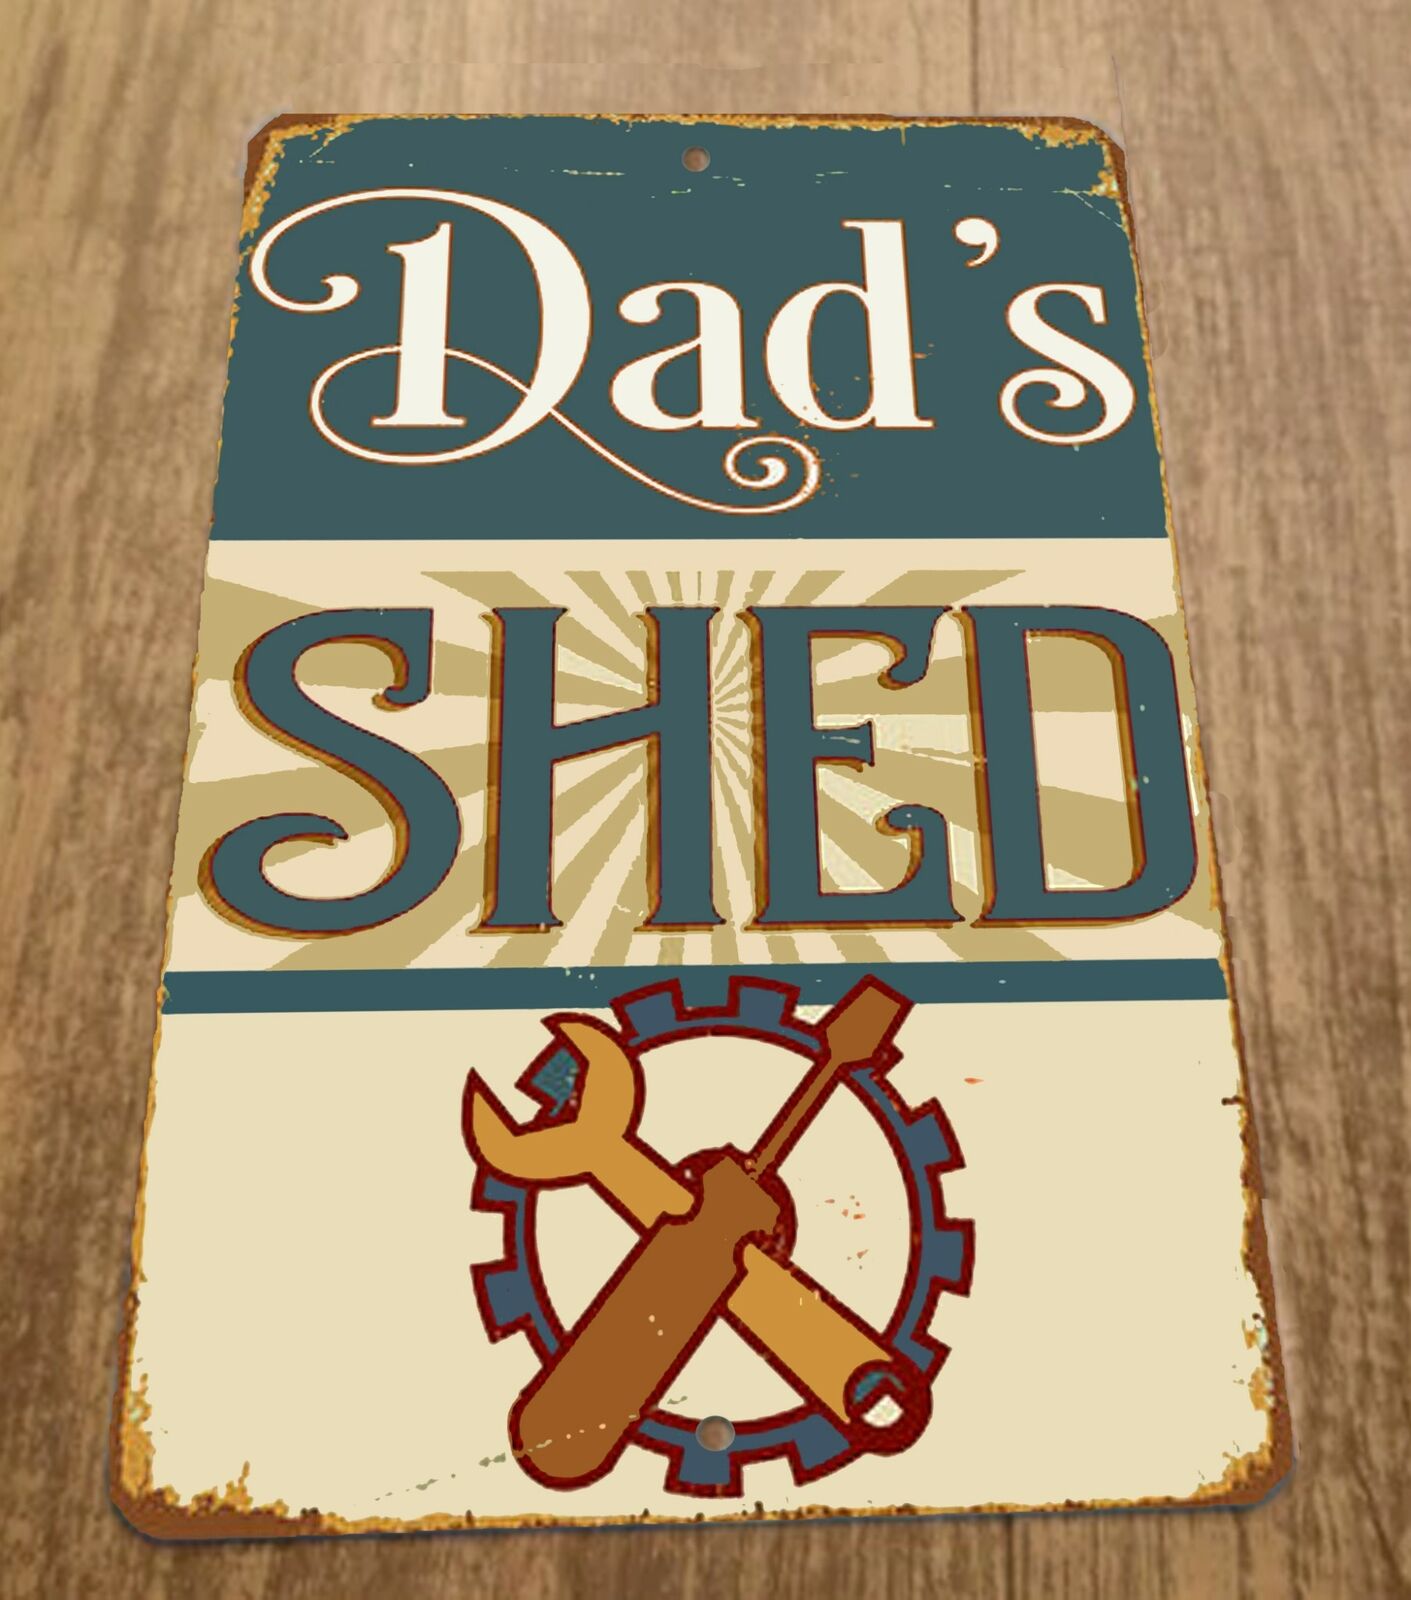 Dads Shed 8x12 Metal Wall Garage Poster Sign